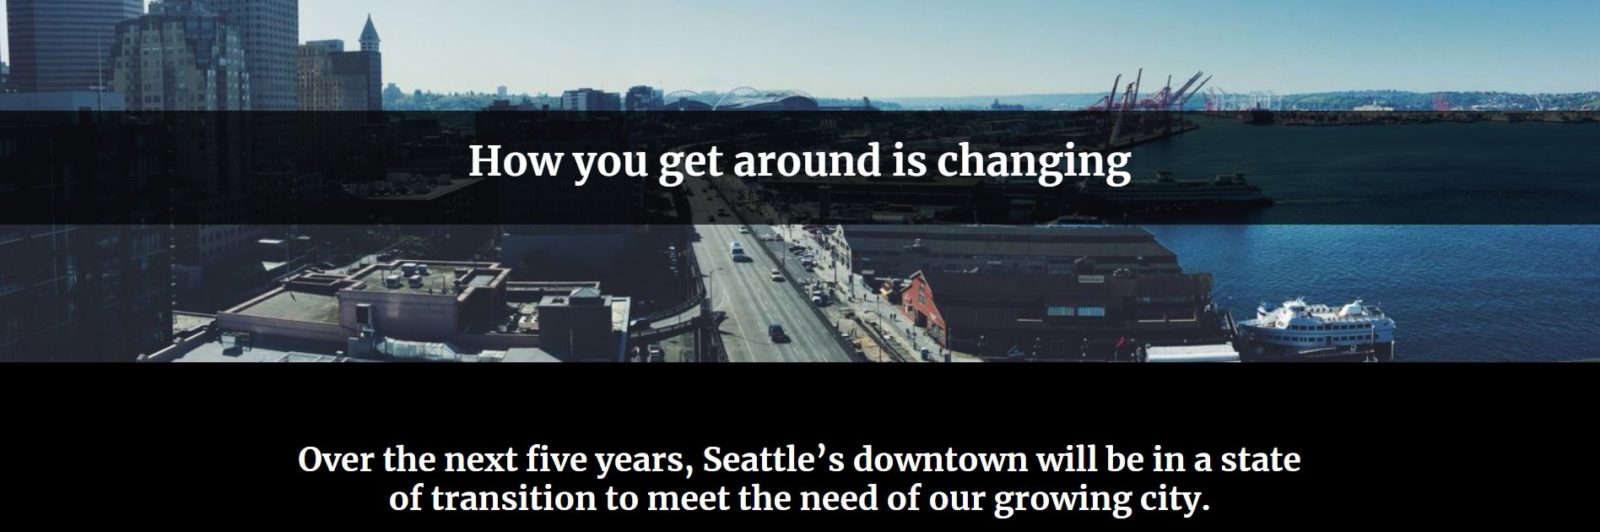 Screenshot of the SeattleTraffic.org website says "The way you get around is changing. Over the next five years, Seattle's downtown will be in a state of transition to meet the need of our growing city."